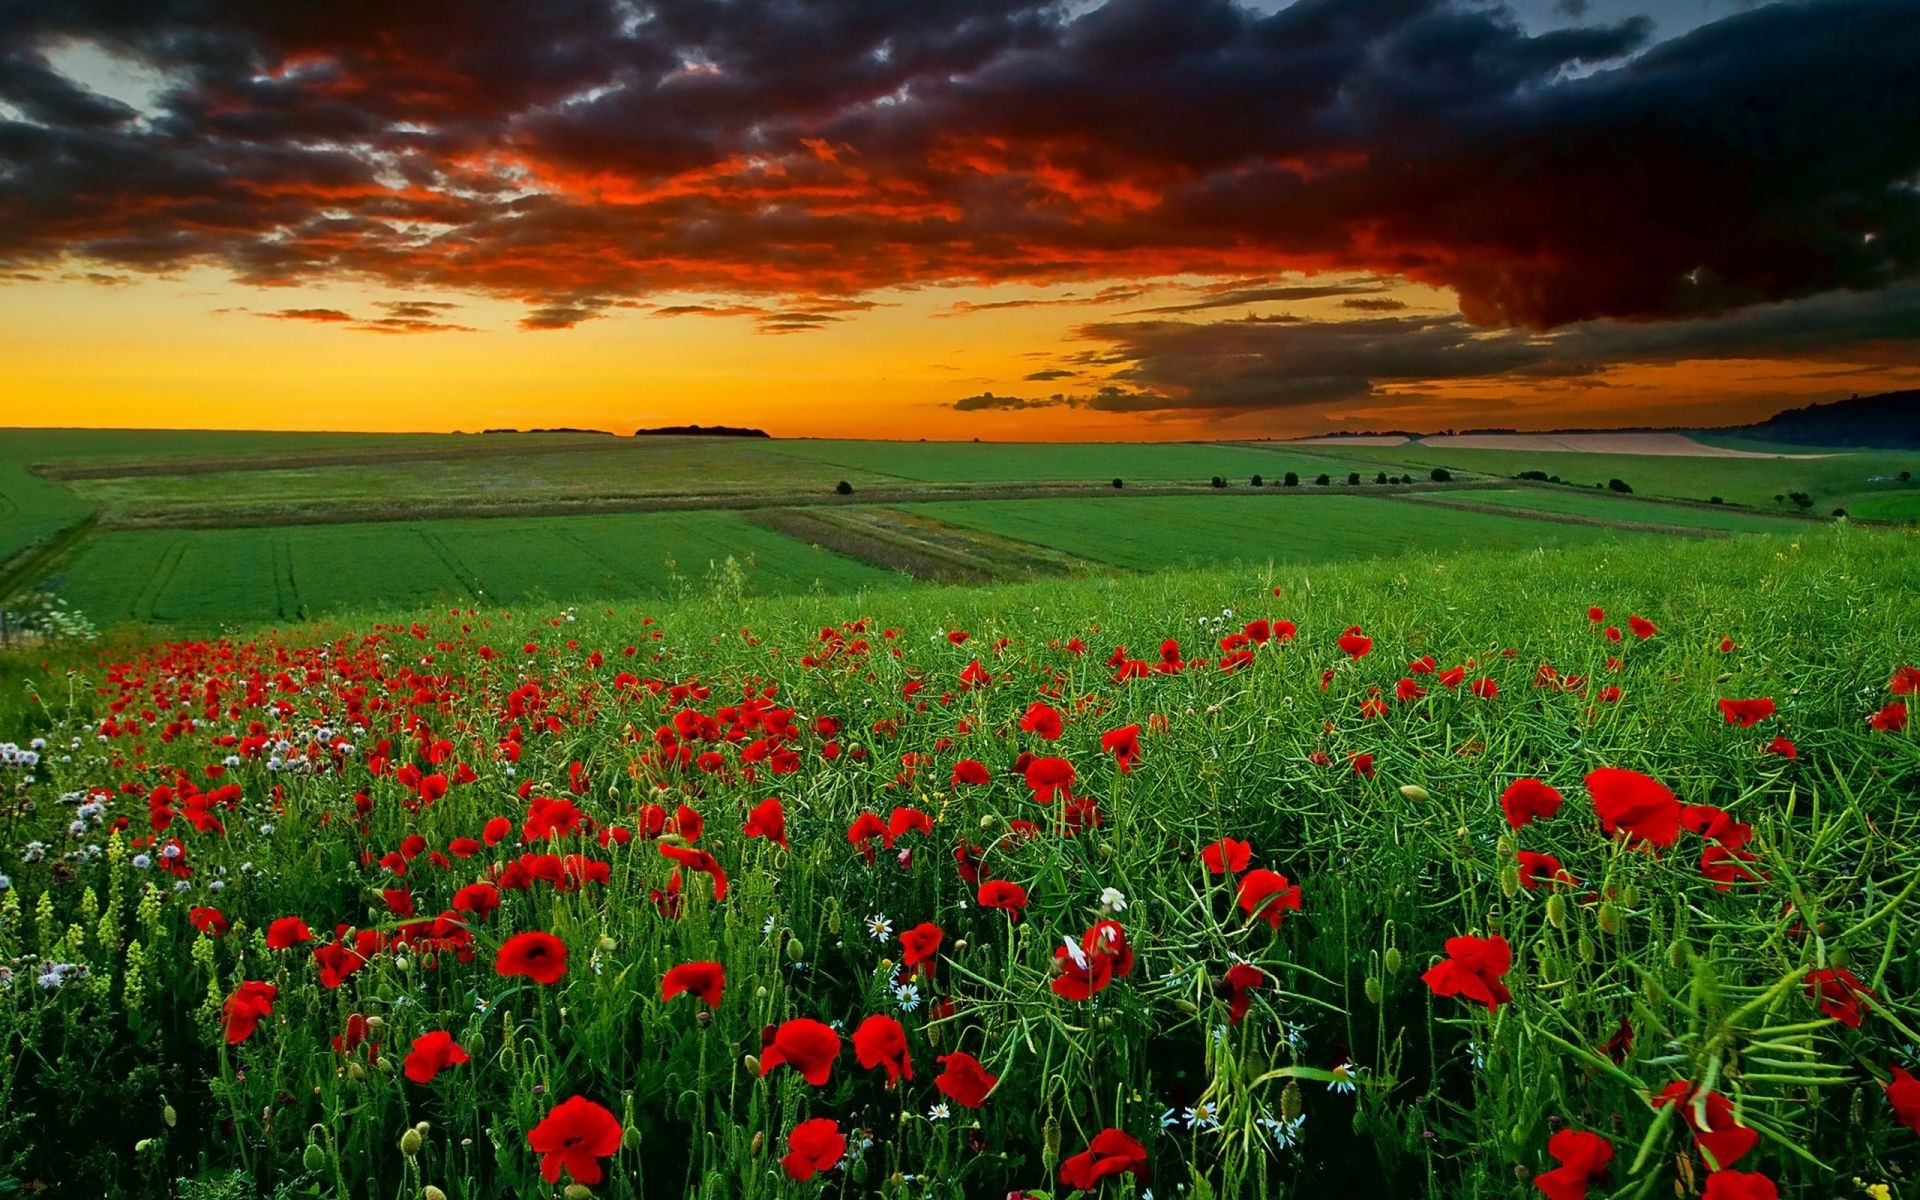 fields meadows and valleys field flower rural hayfield poppy nature landscape grass farm flora countryside agriculture summer country growth season color bright vibrant